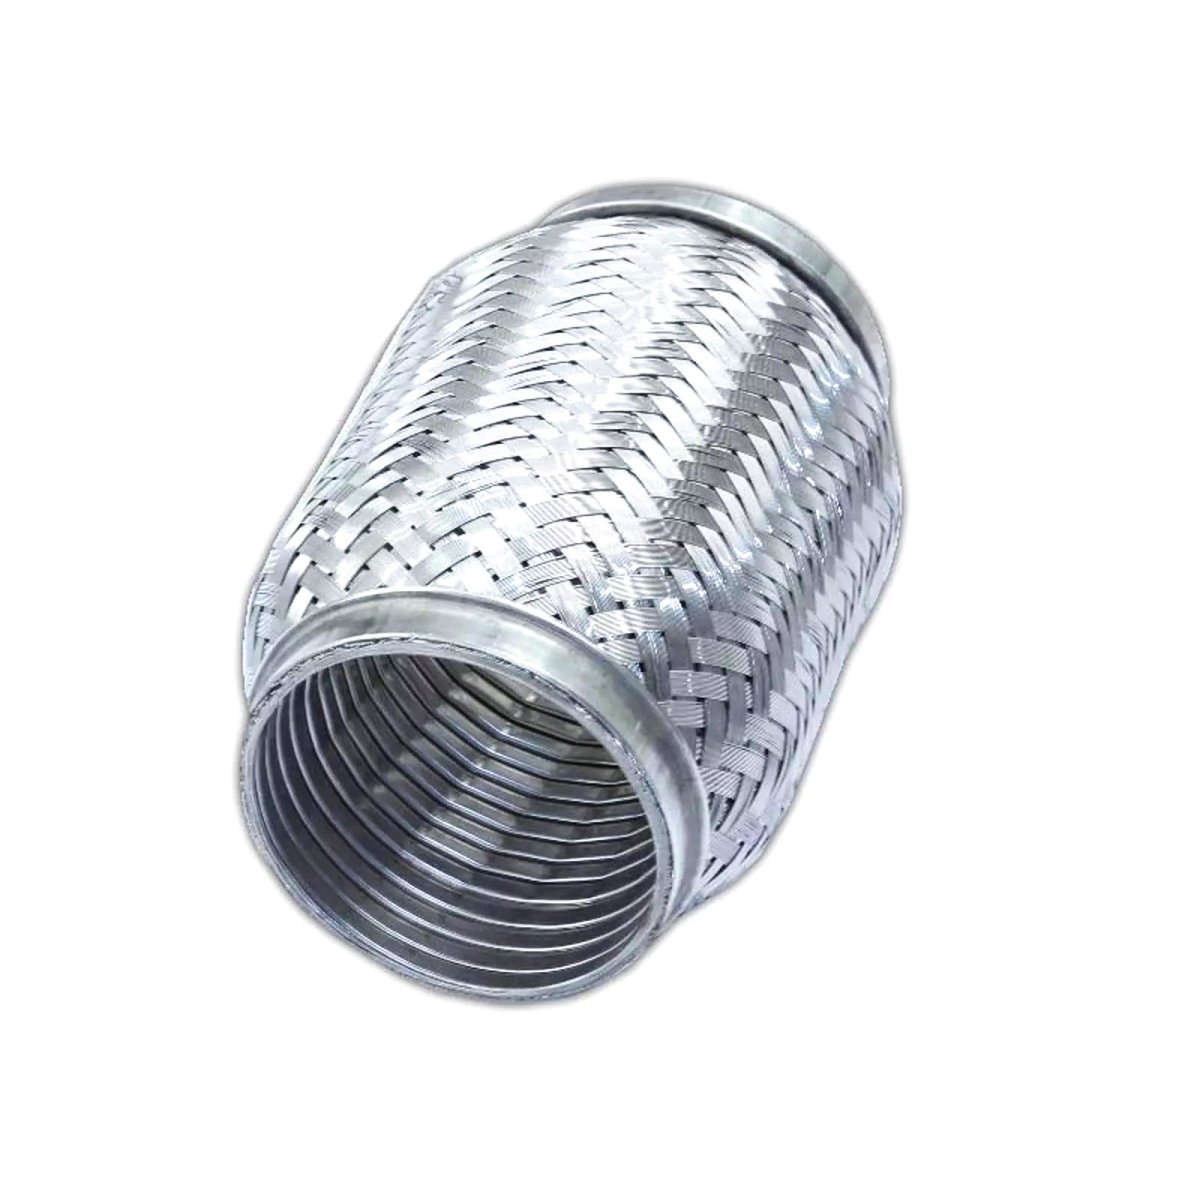 FAMEFORM flex pipe exhaust pipe (stainless steel) - PARTS33 GmbH